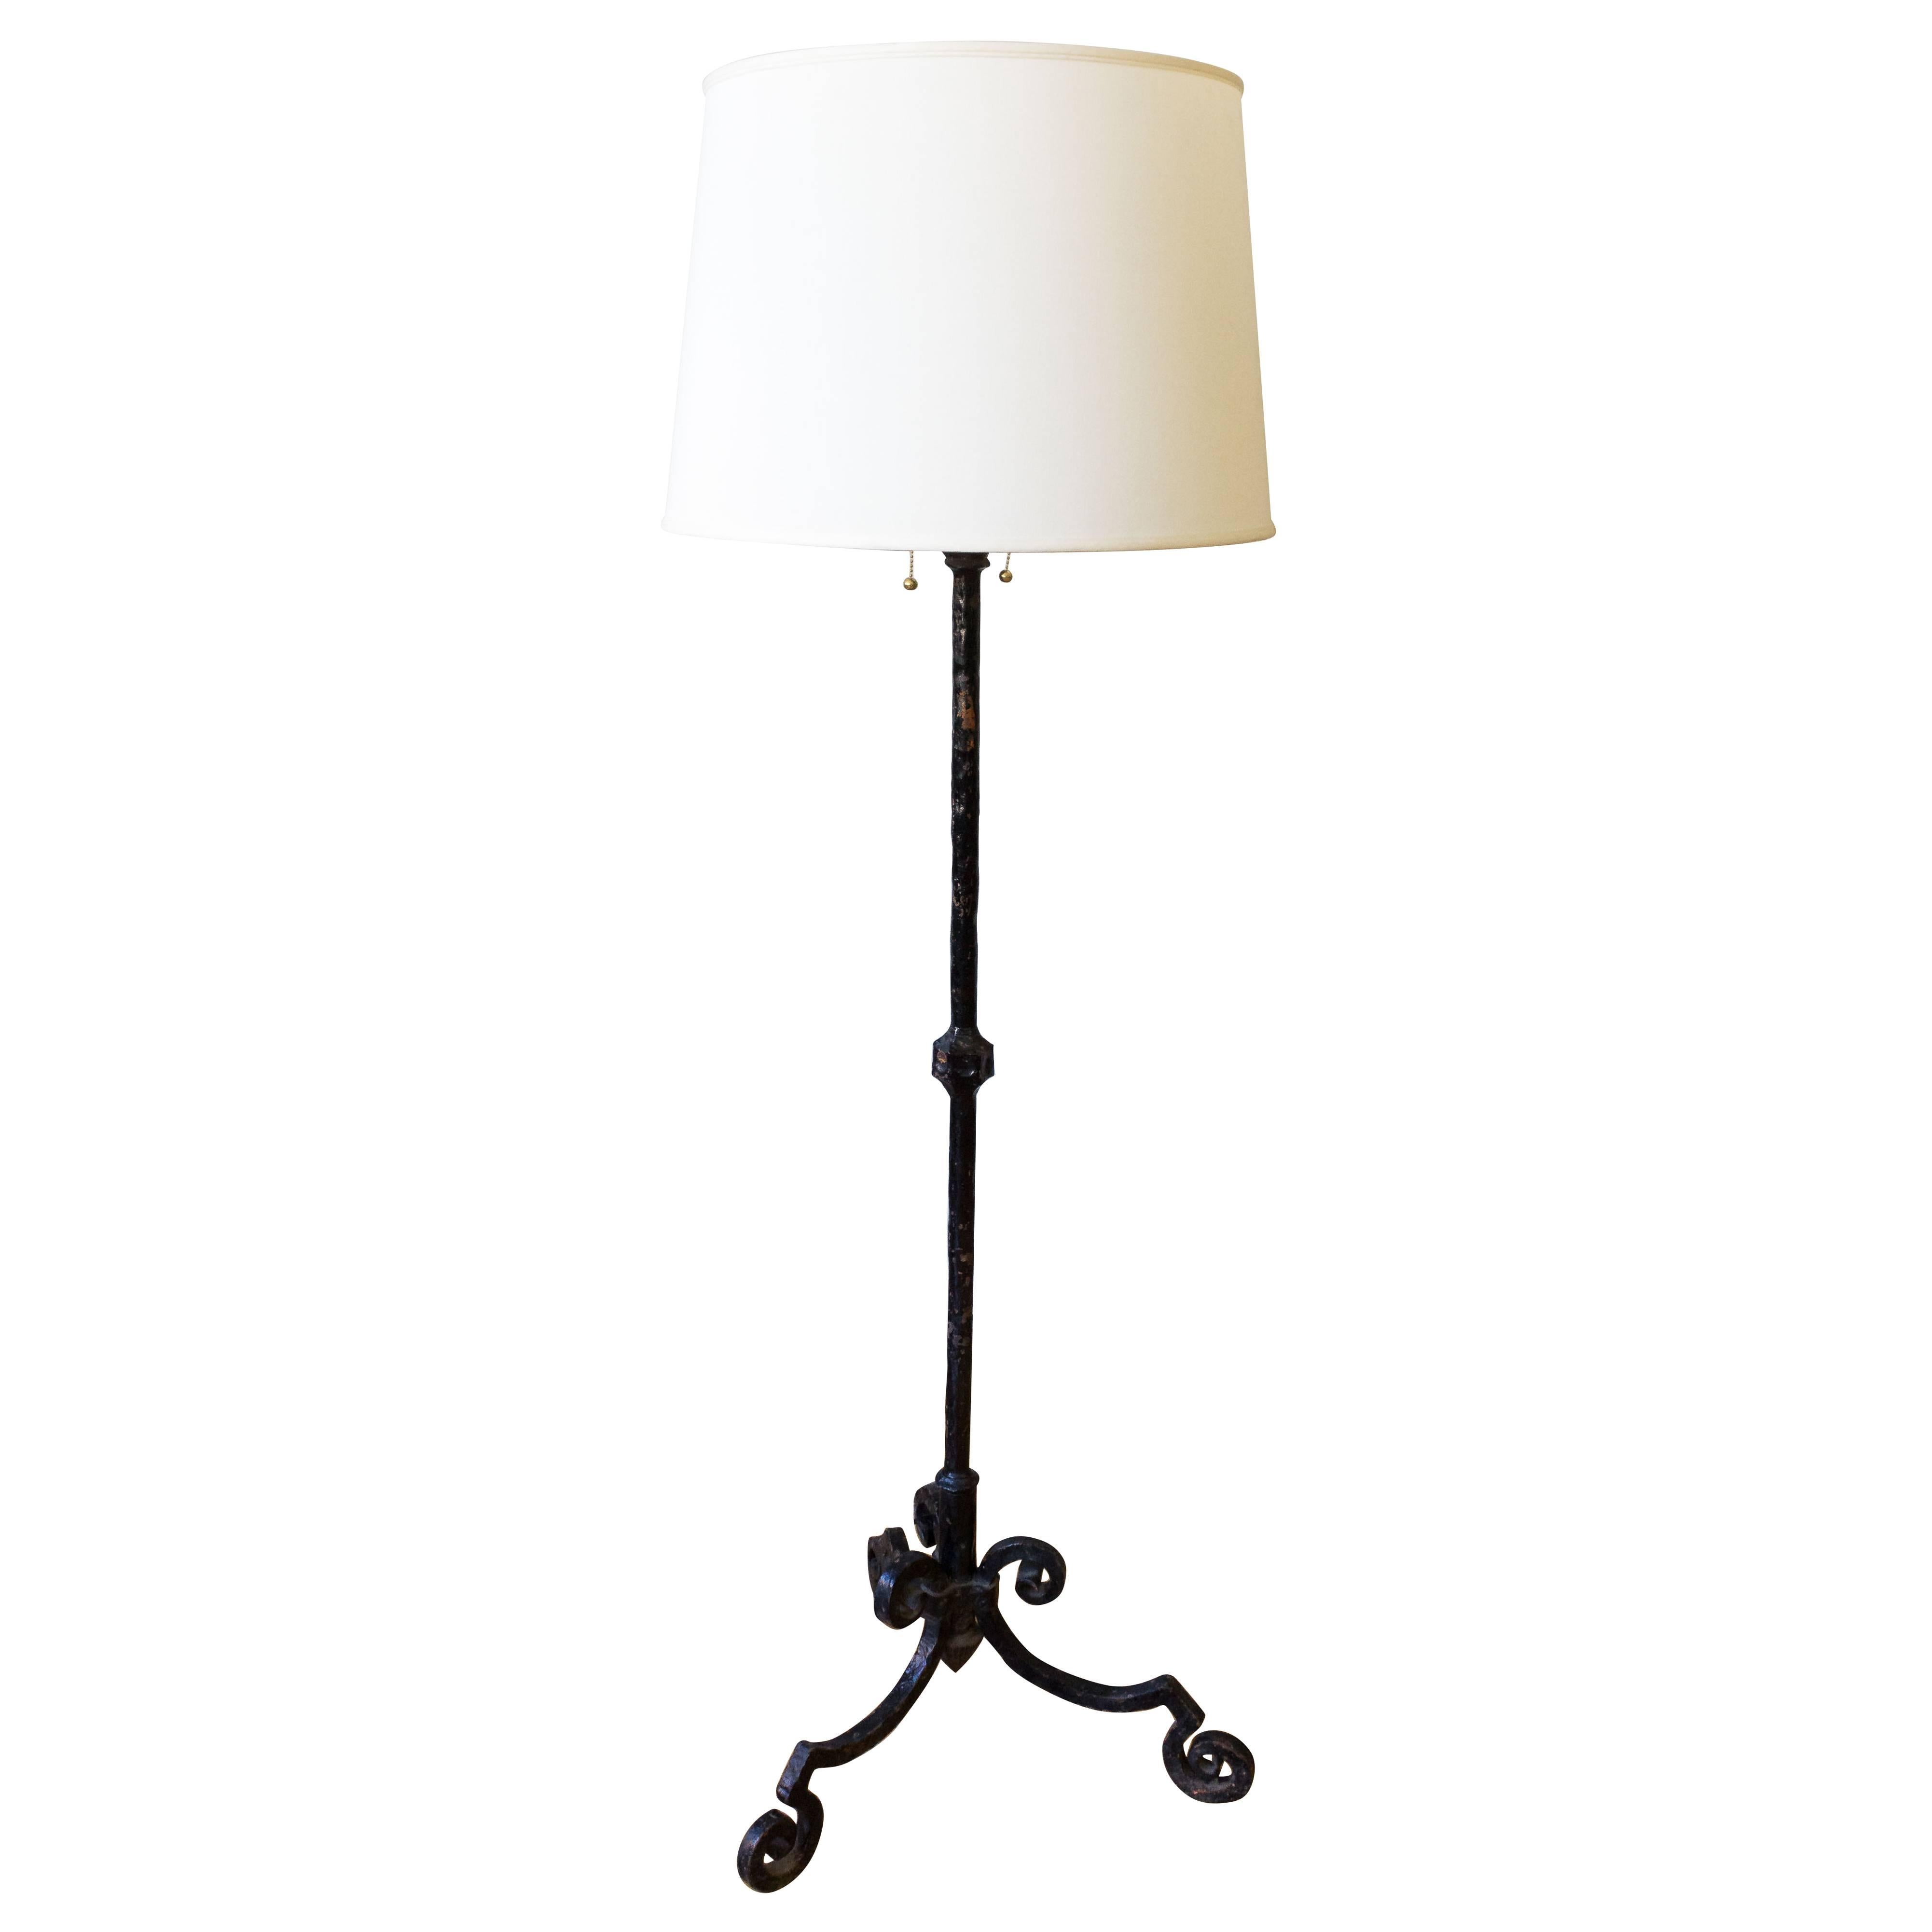 Large Painted Wrought Iron Floor Lamp